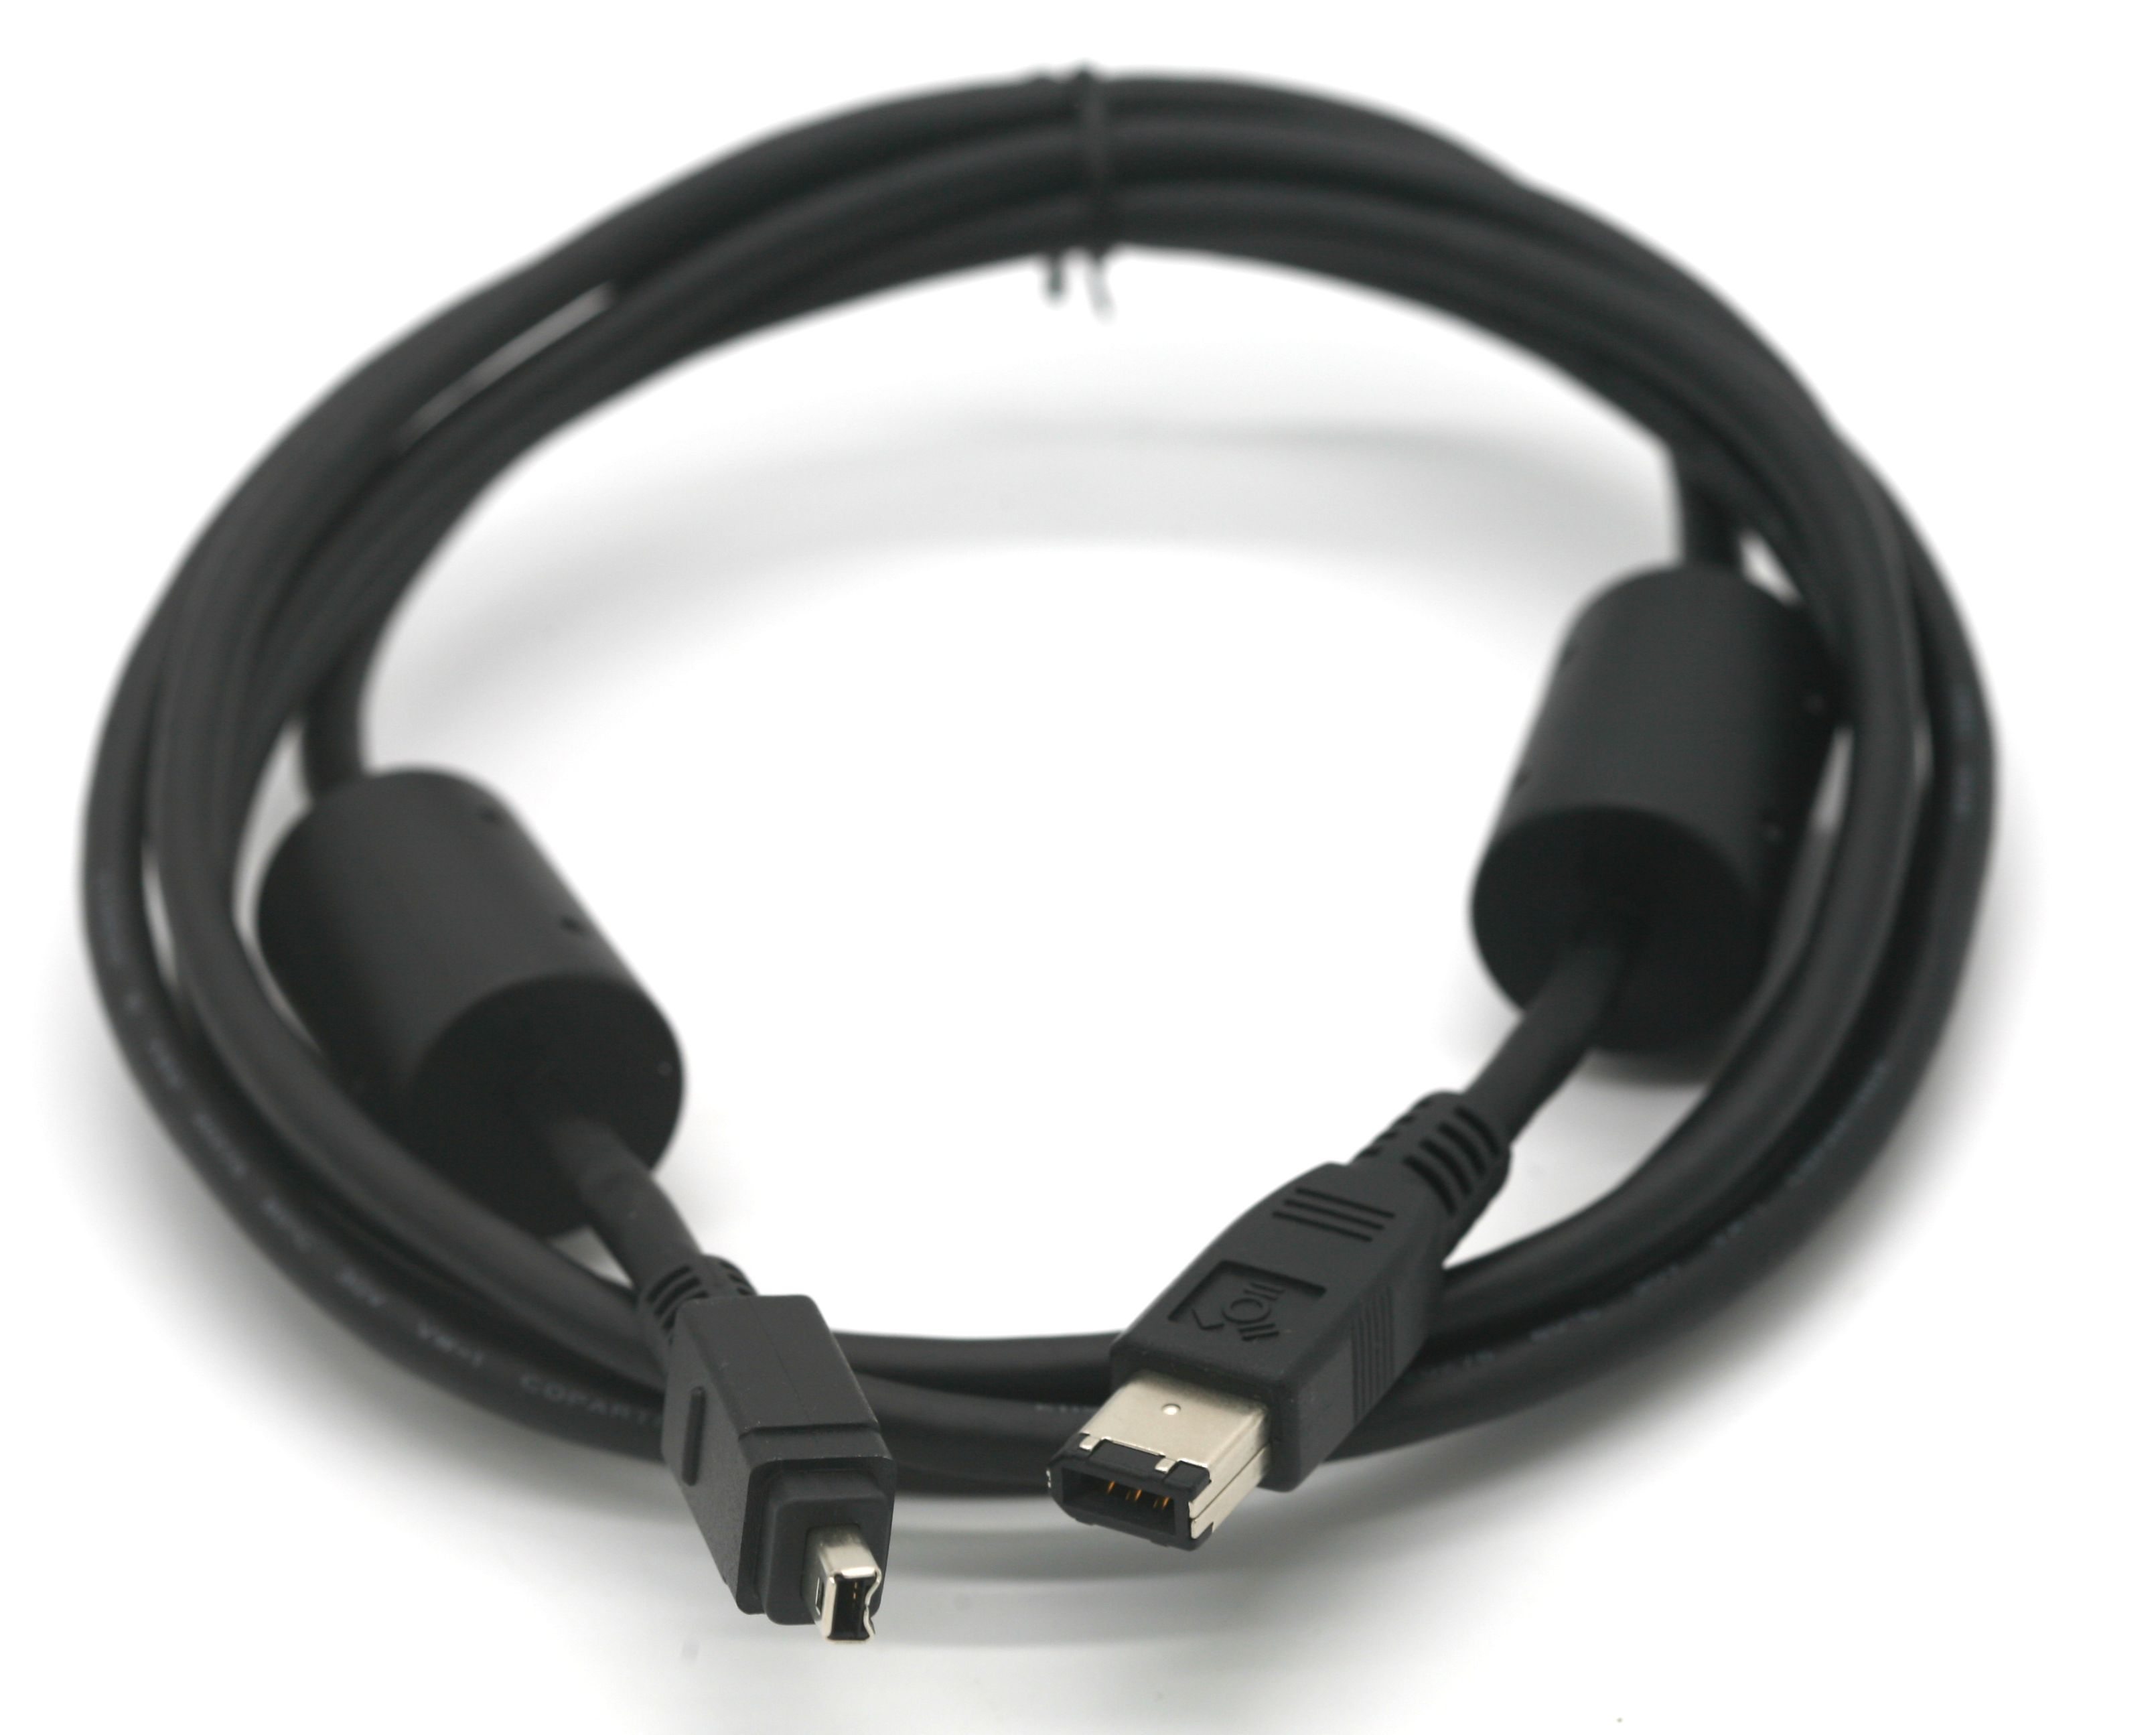 6FT Firewire Cable Black 6pin 4pin with Ferrite 1394A Premium Heavy Duty